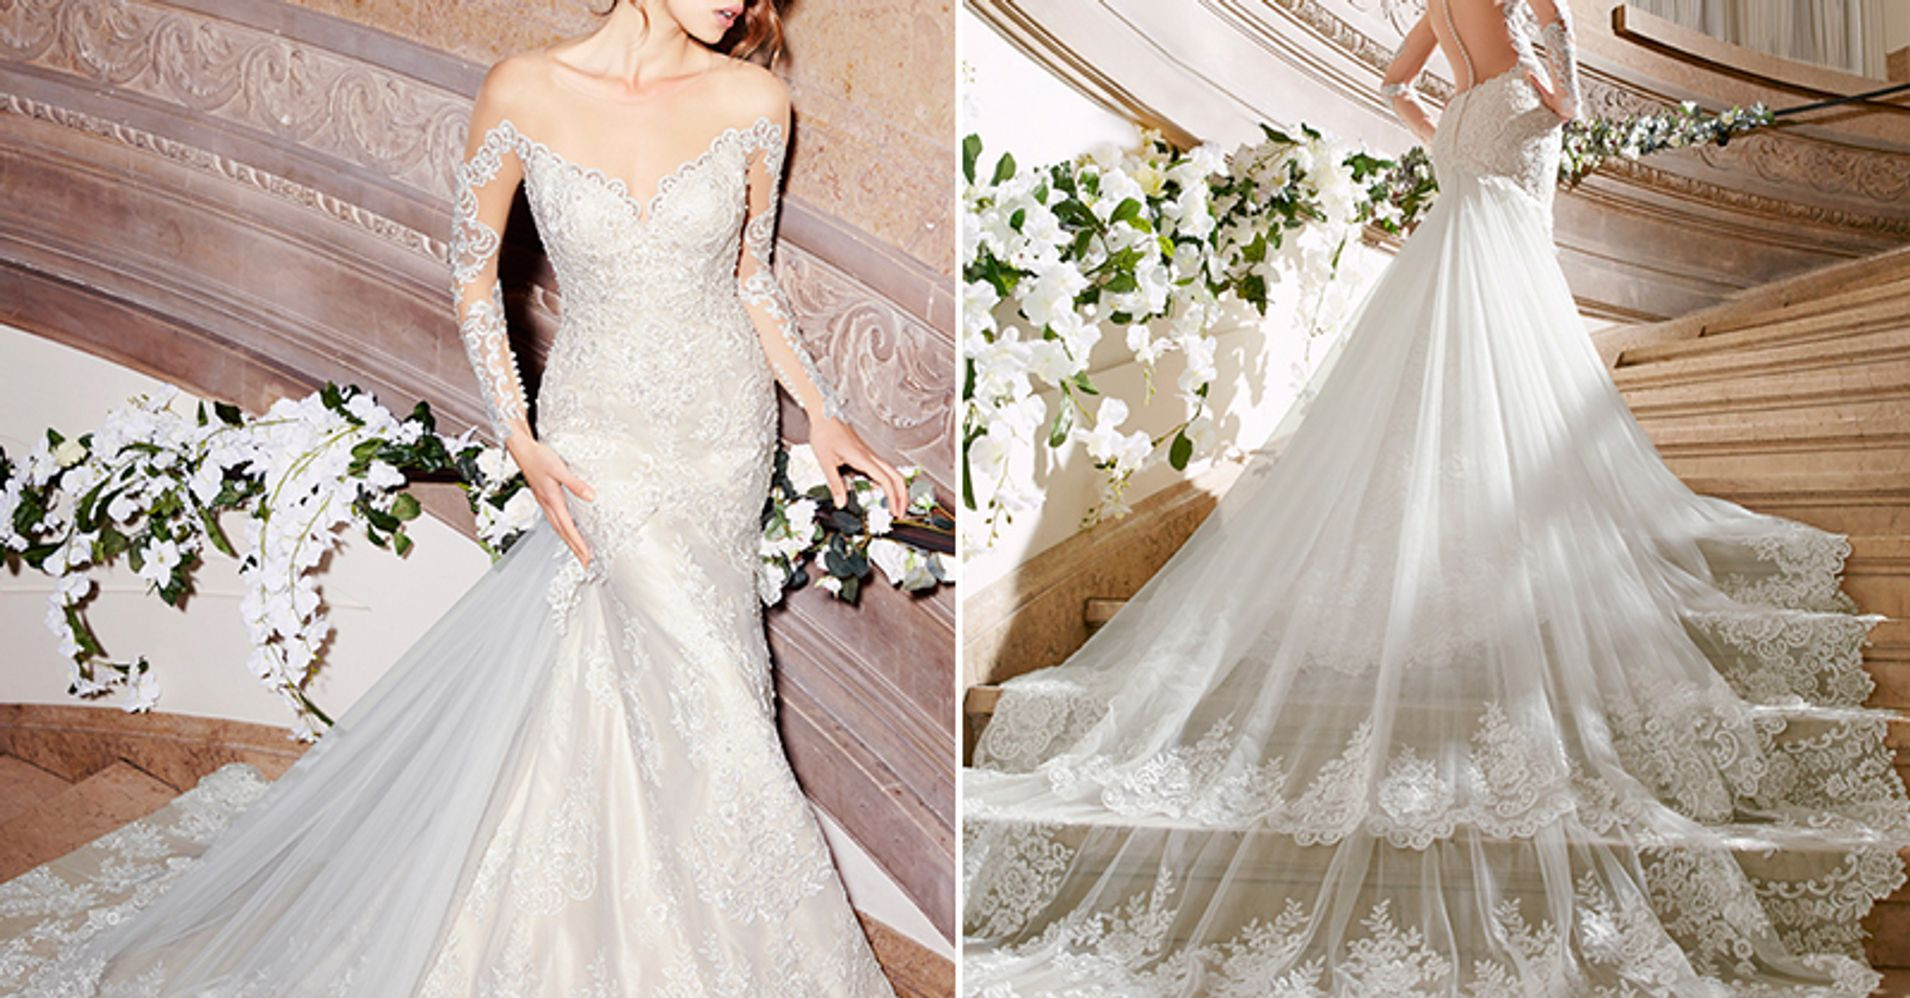 Wedding Gowns Pinterest
 The 25 Most Pinned Wedding Dresses 2016